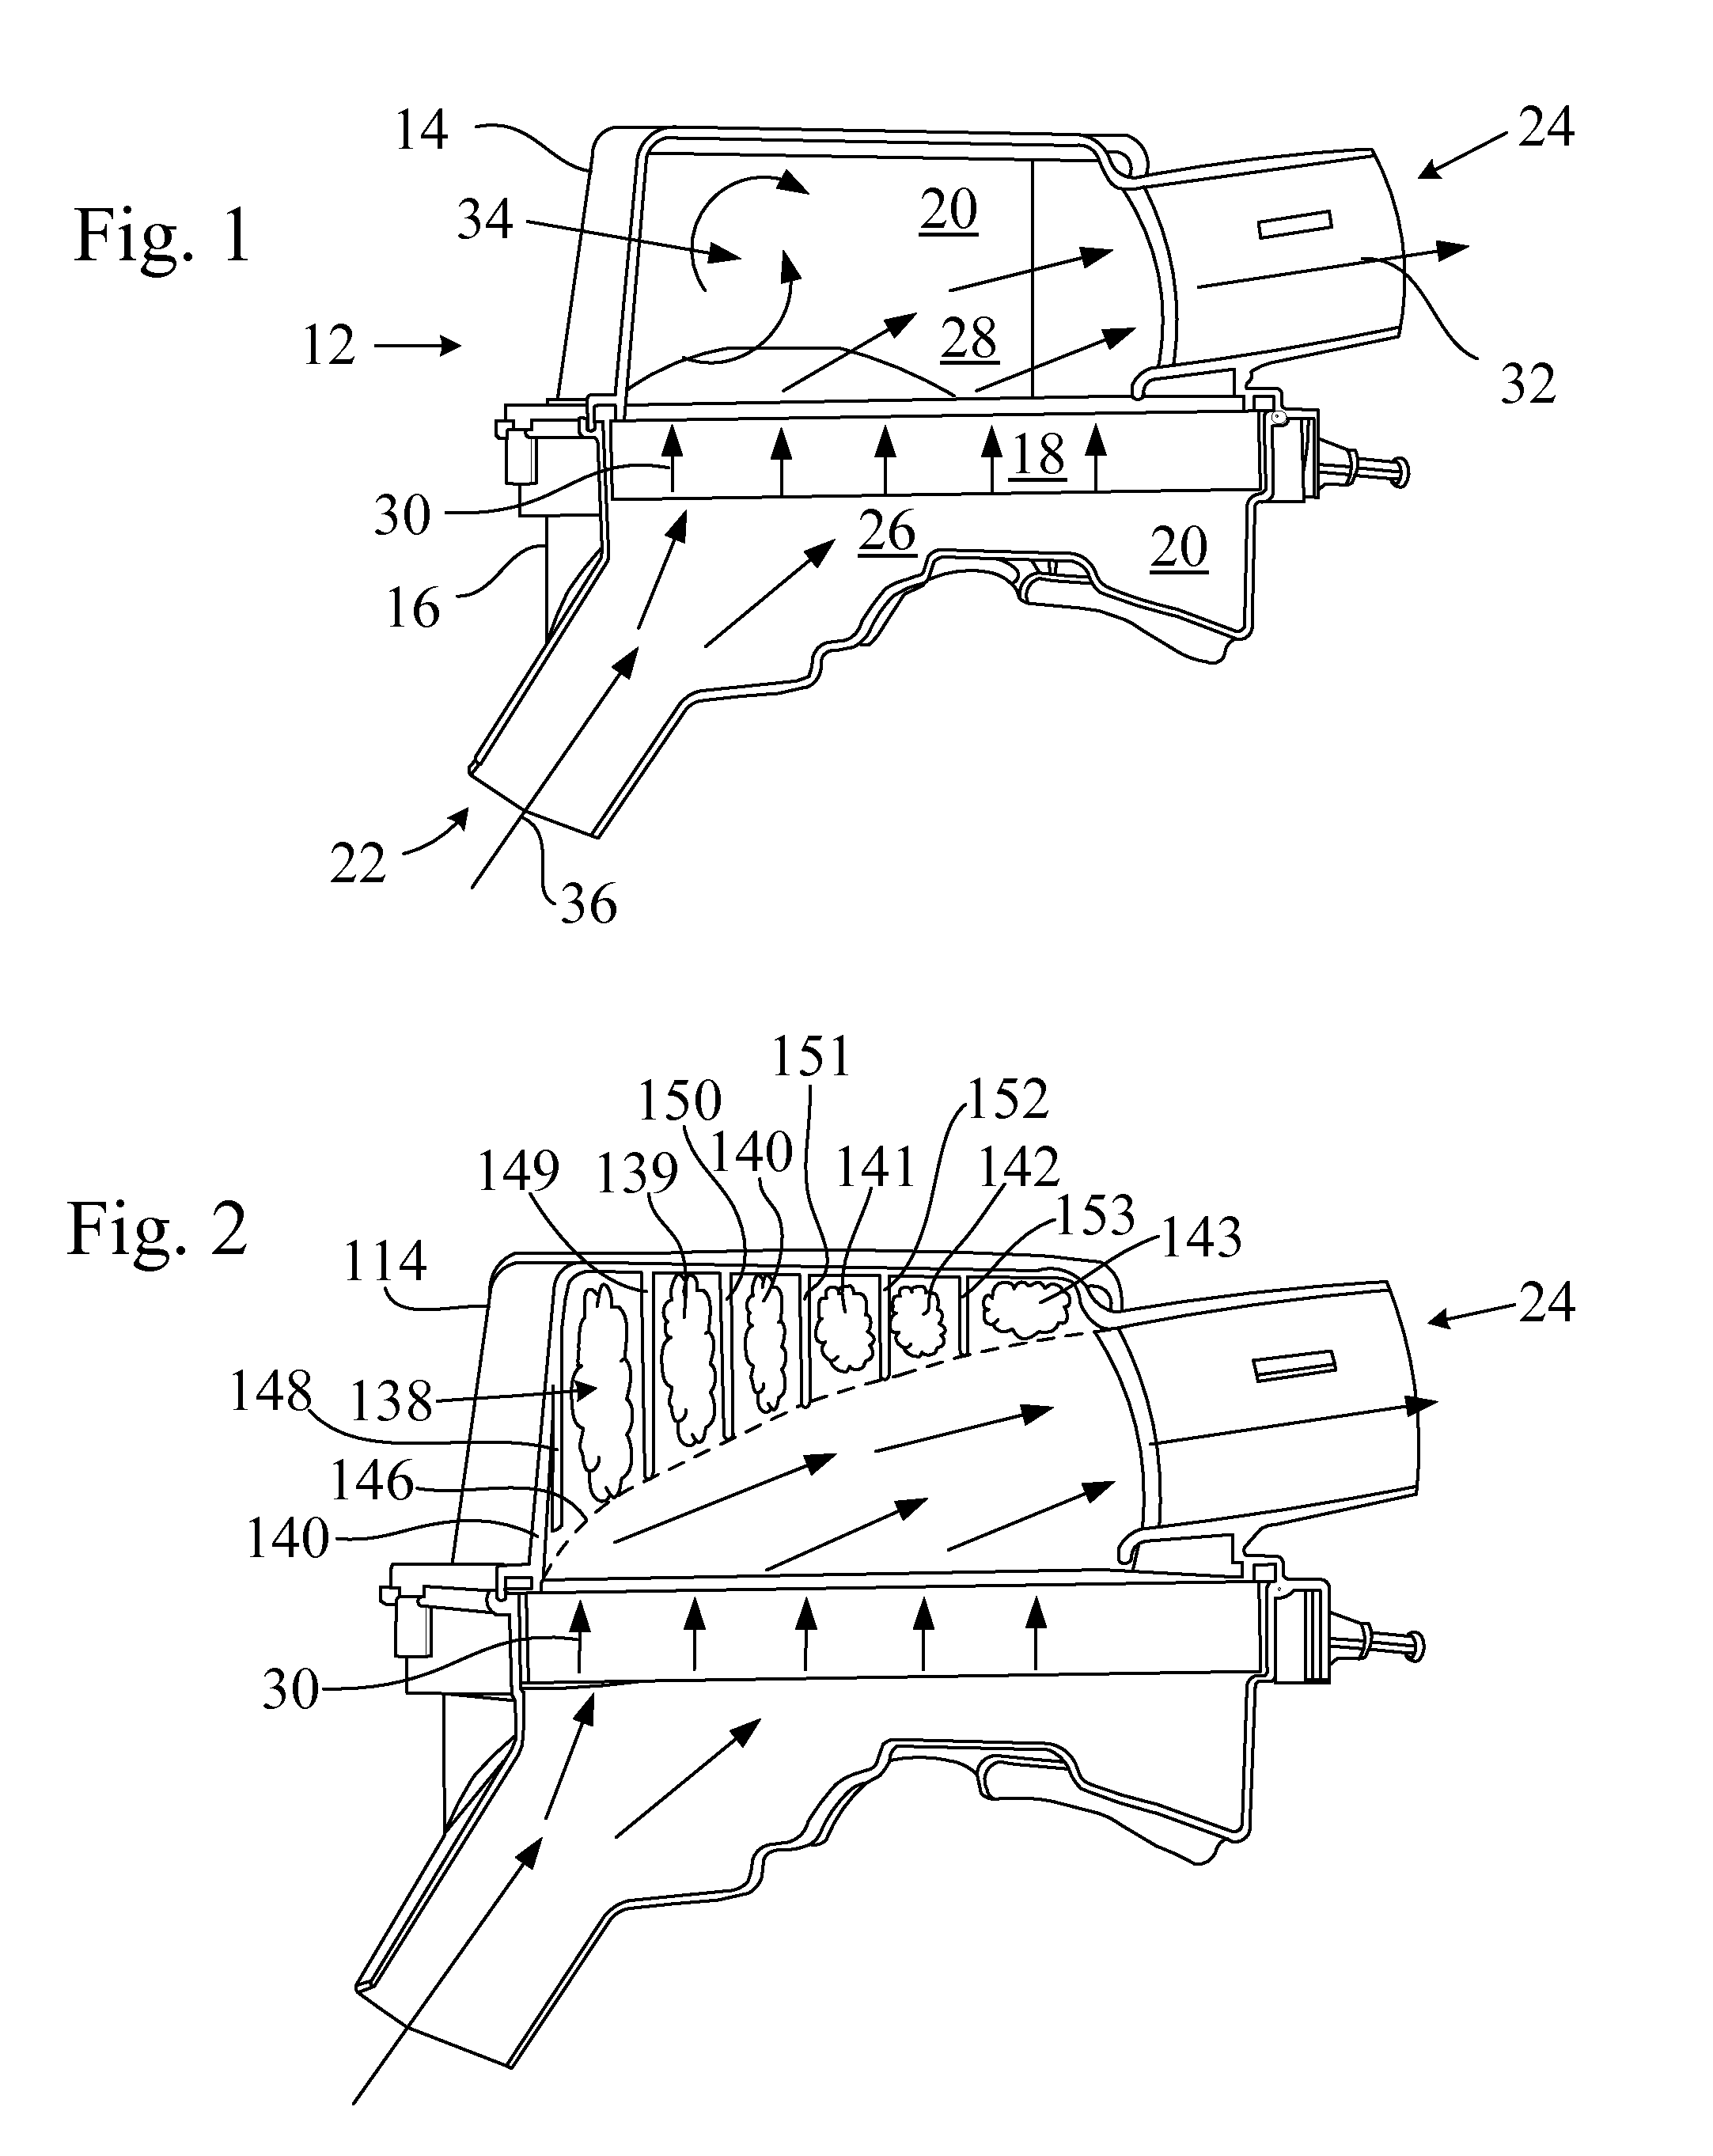 Air pillow flow guidance and acoustic countermeasure system for an air intake tract